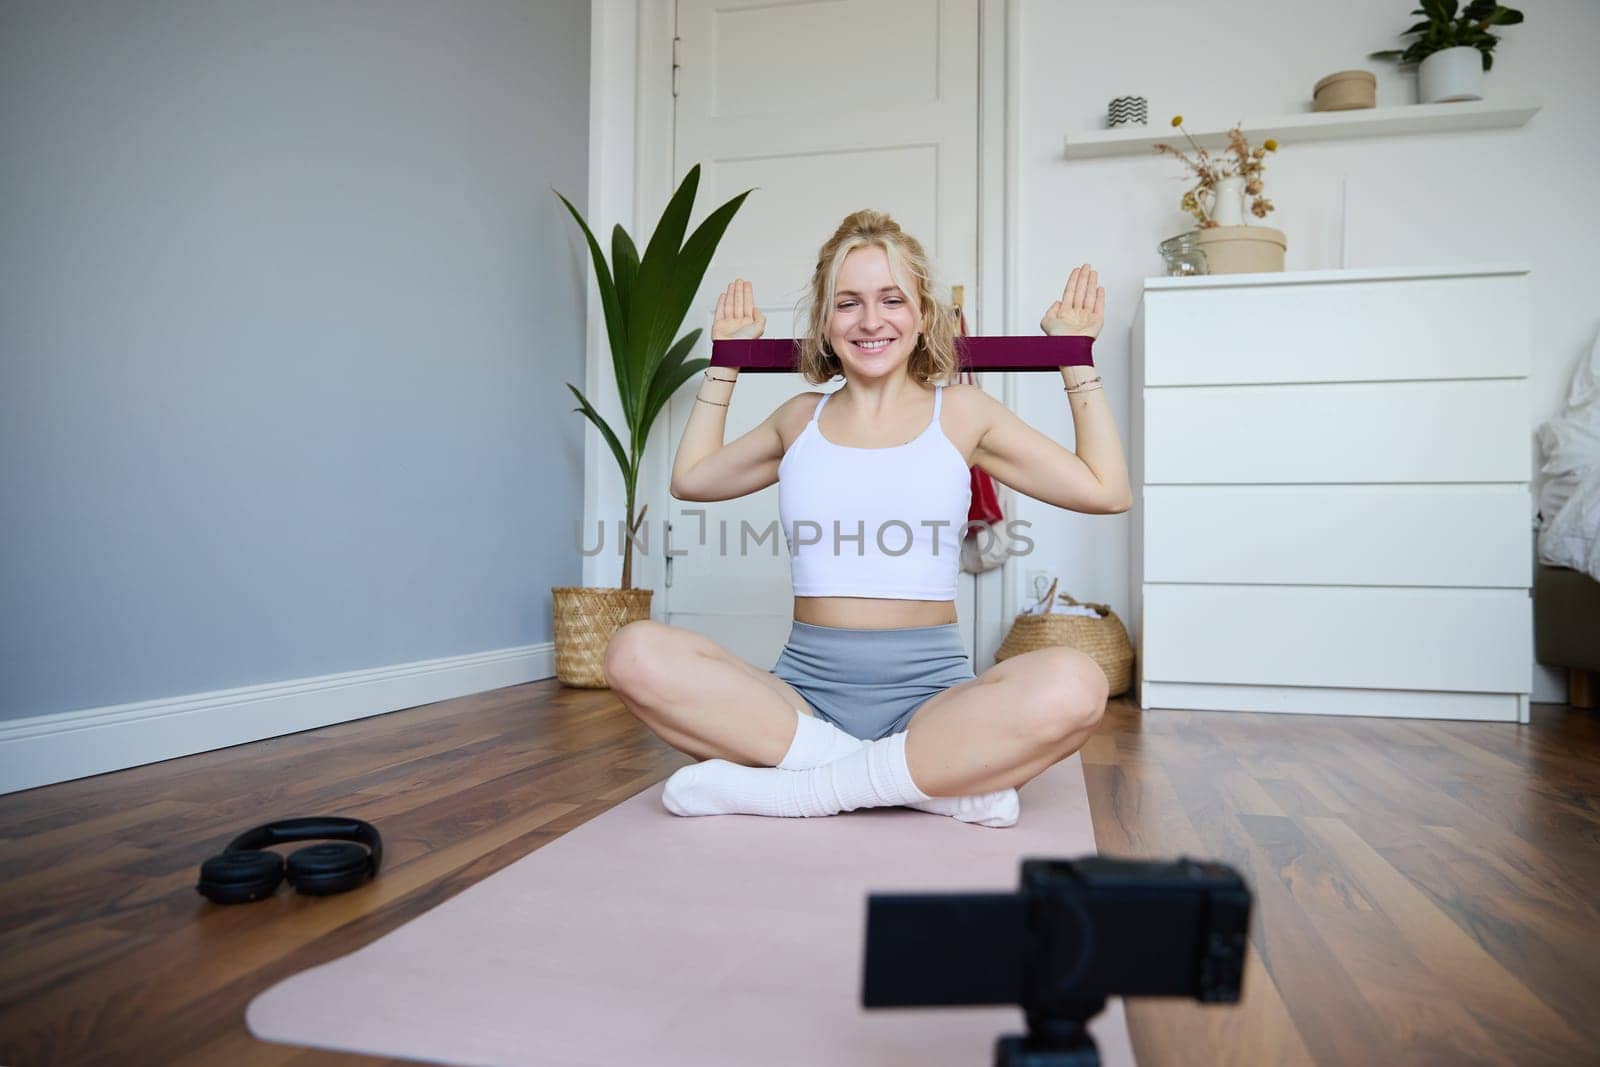 Portrait of young athletic woman recording home workout video, shooting content for sport fitness vlog, using resistance band and digital camera.